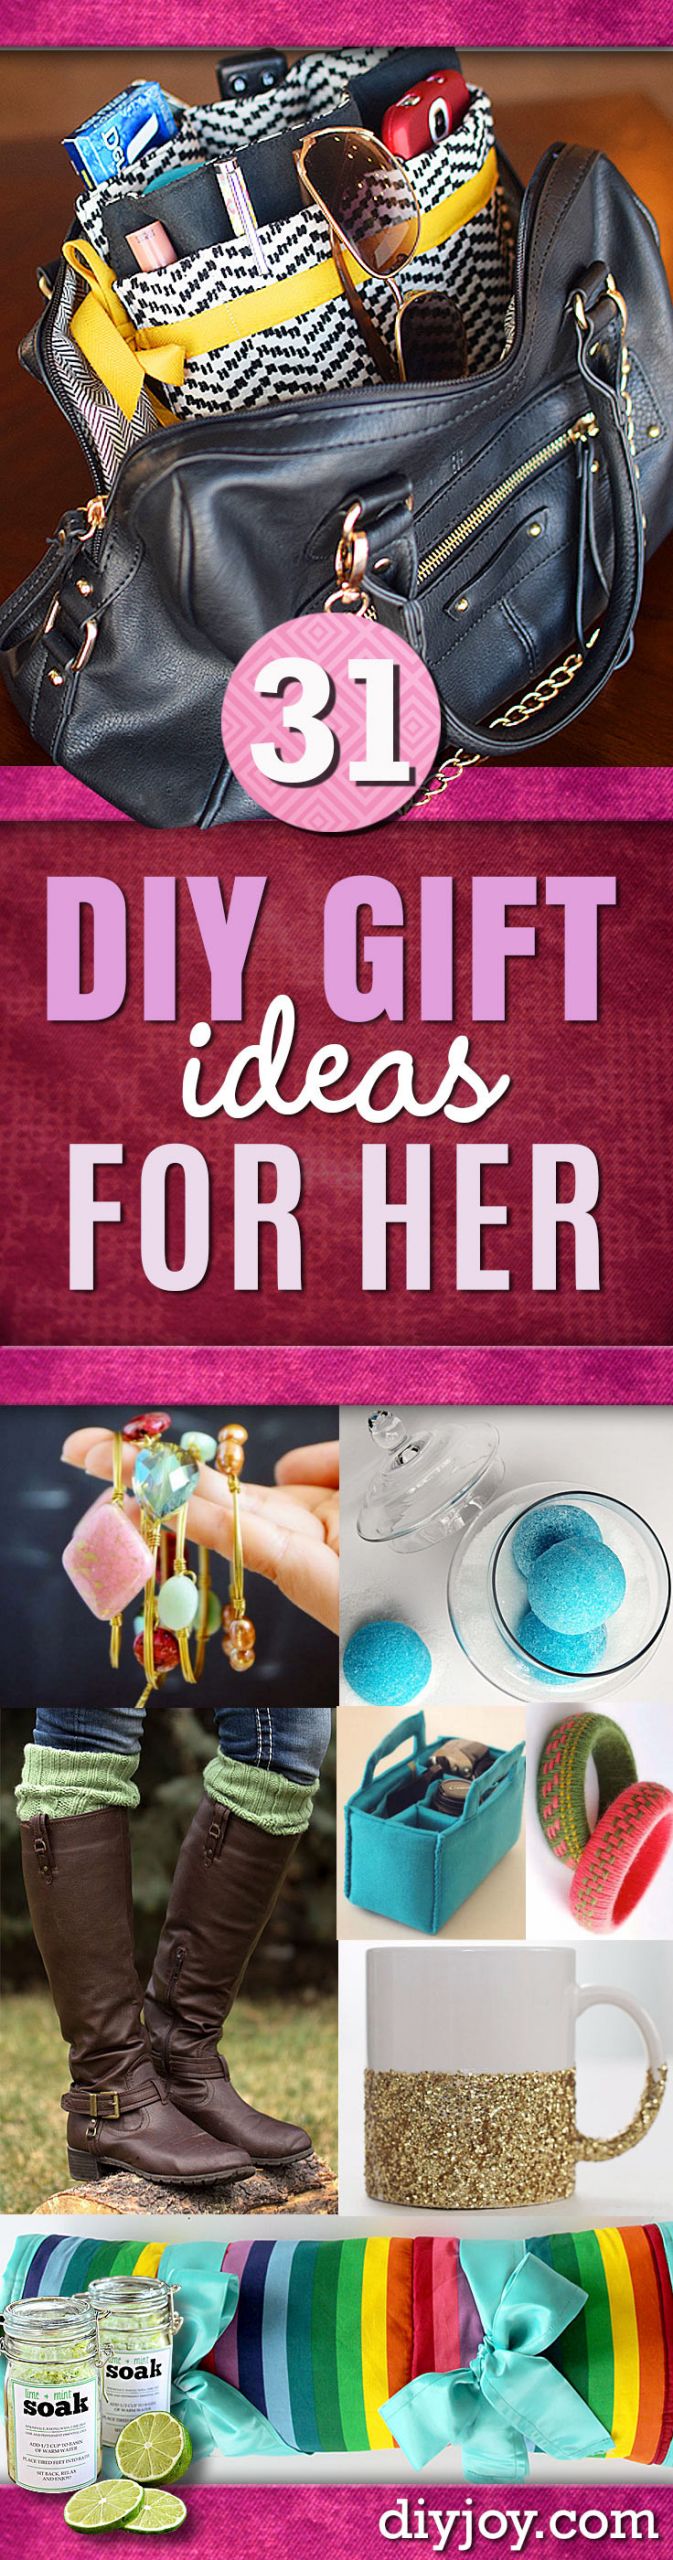 DIY Christmas Gift For Her
 Super Special DIY Gift Ideas for Her